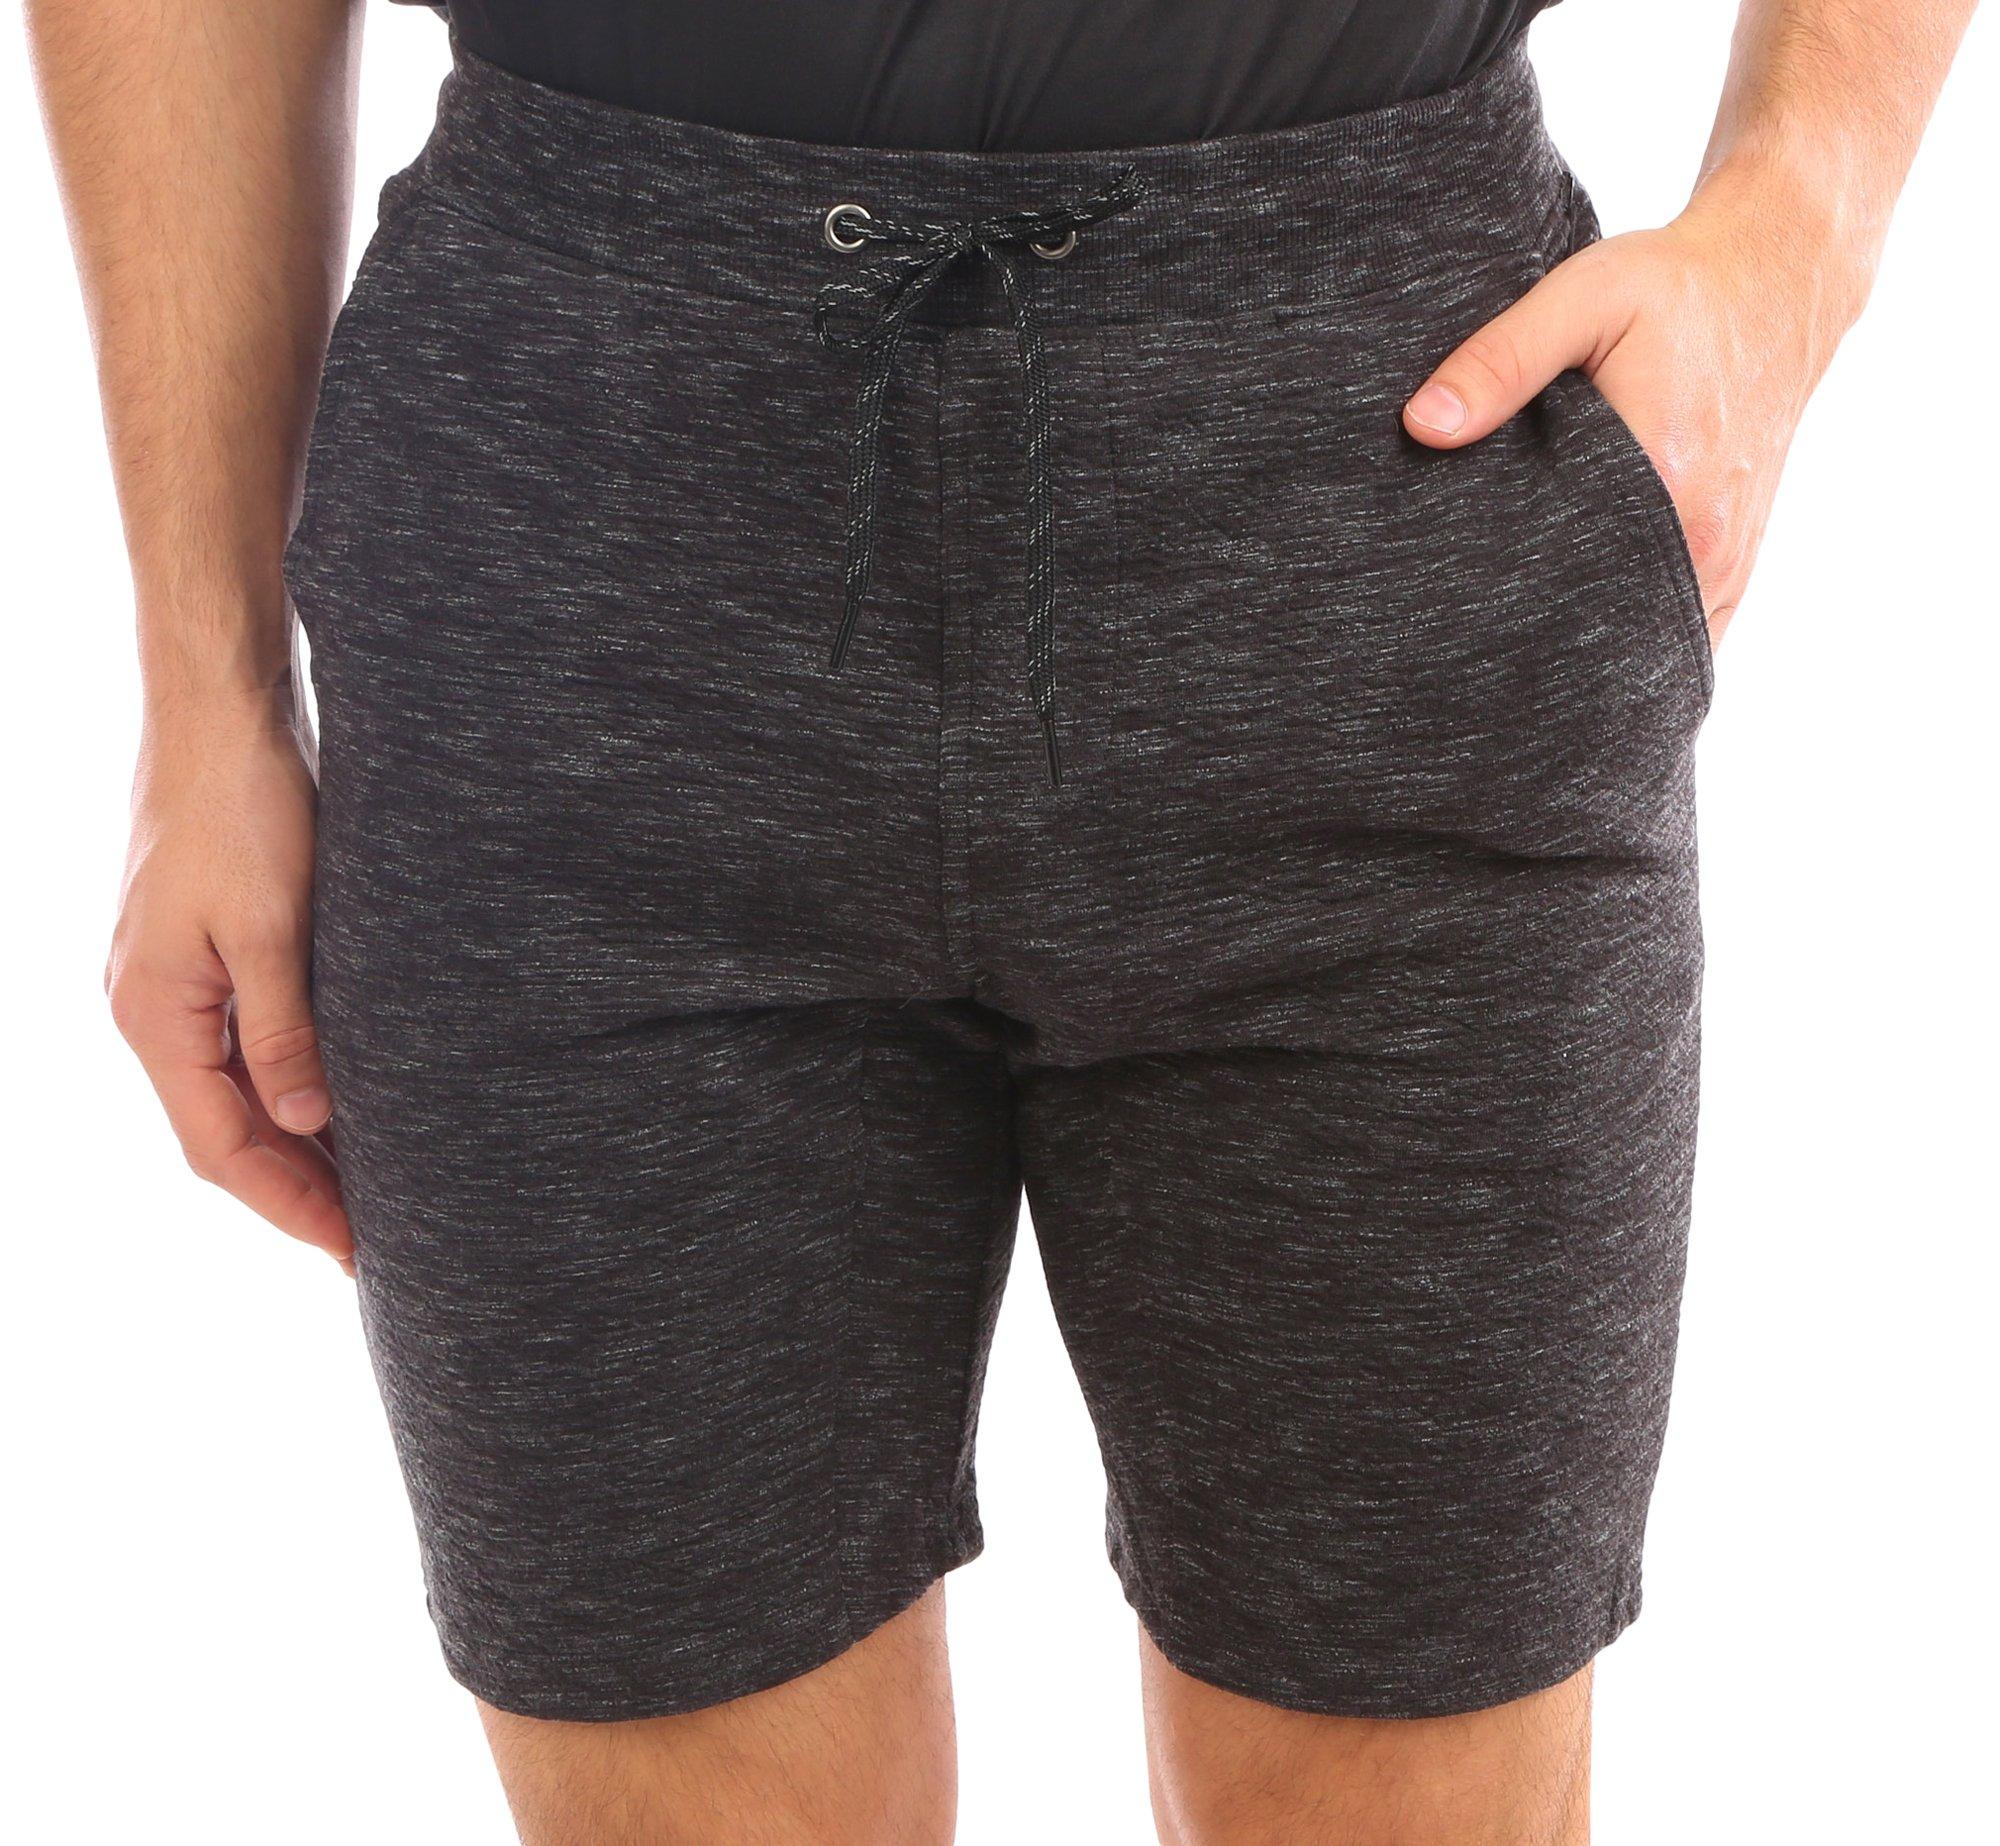 Mens 11in. Crinkle Knit Shorts